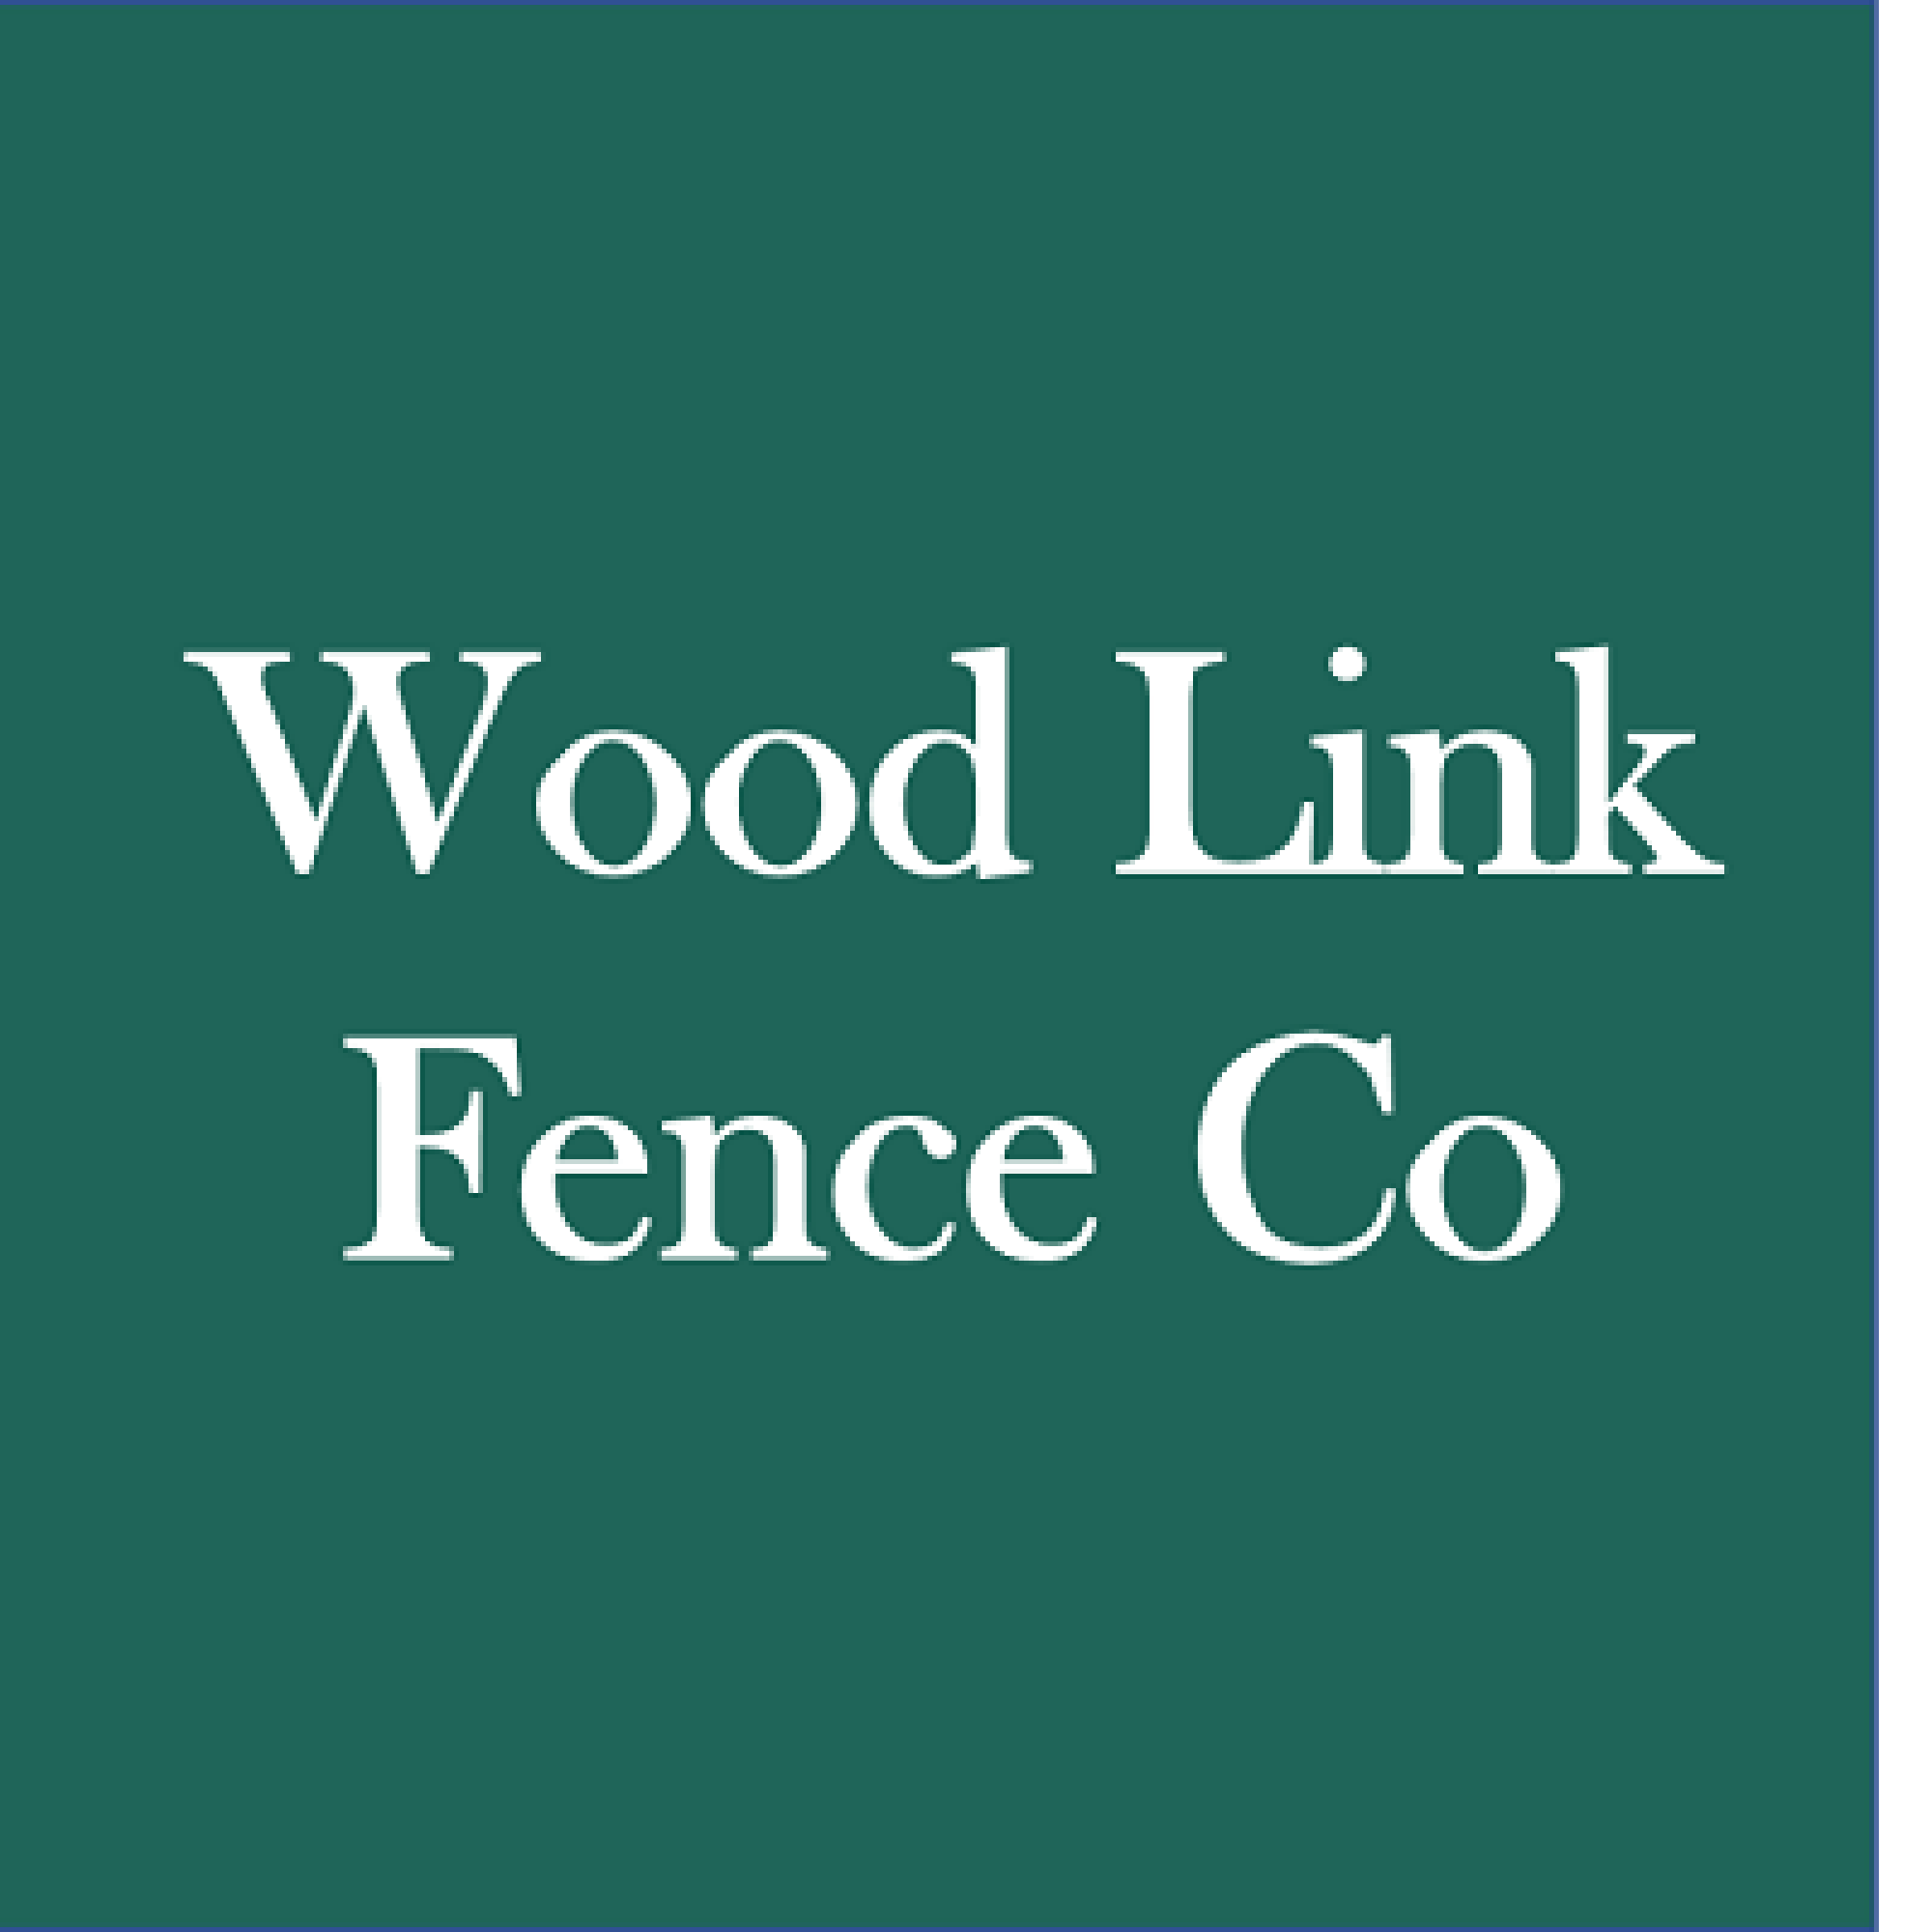 Wood Link Fence Co - Columbia, MO 65201 - (573)474-5115 | ShowMeLocal.com